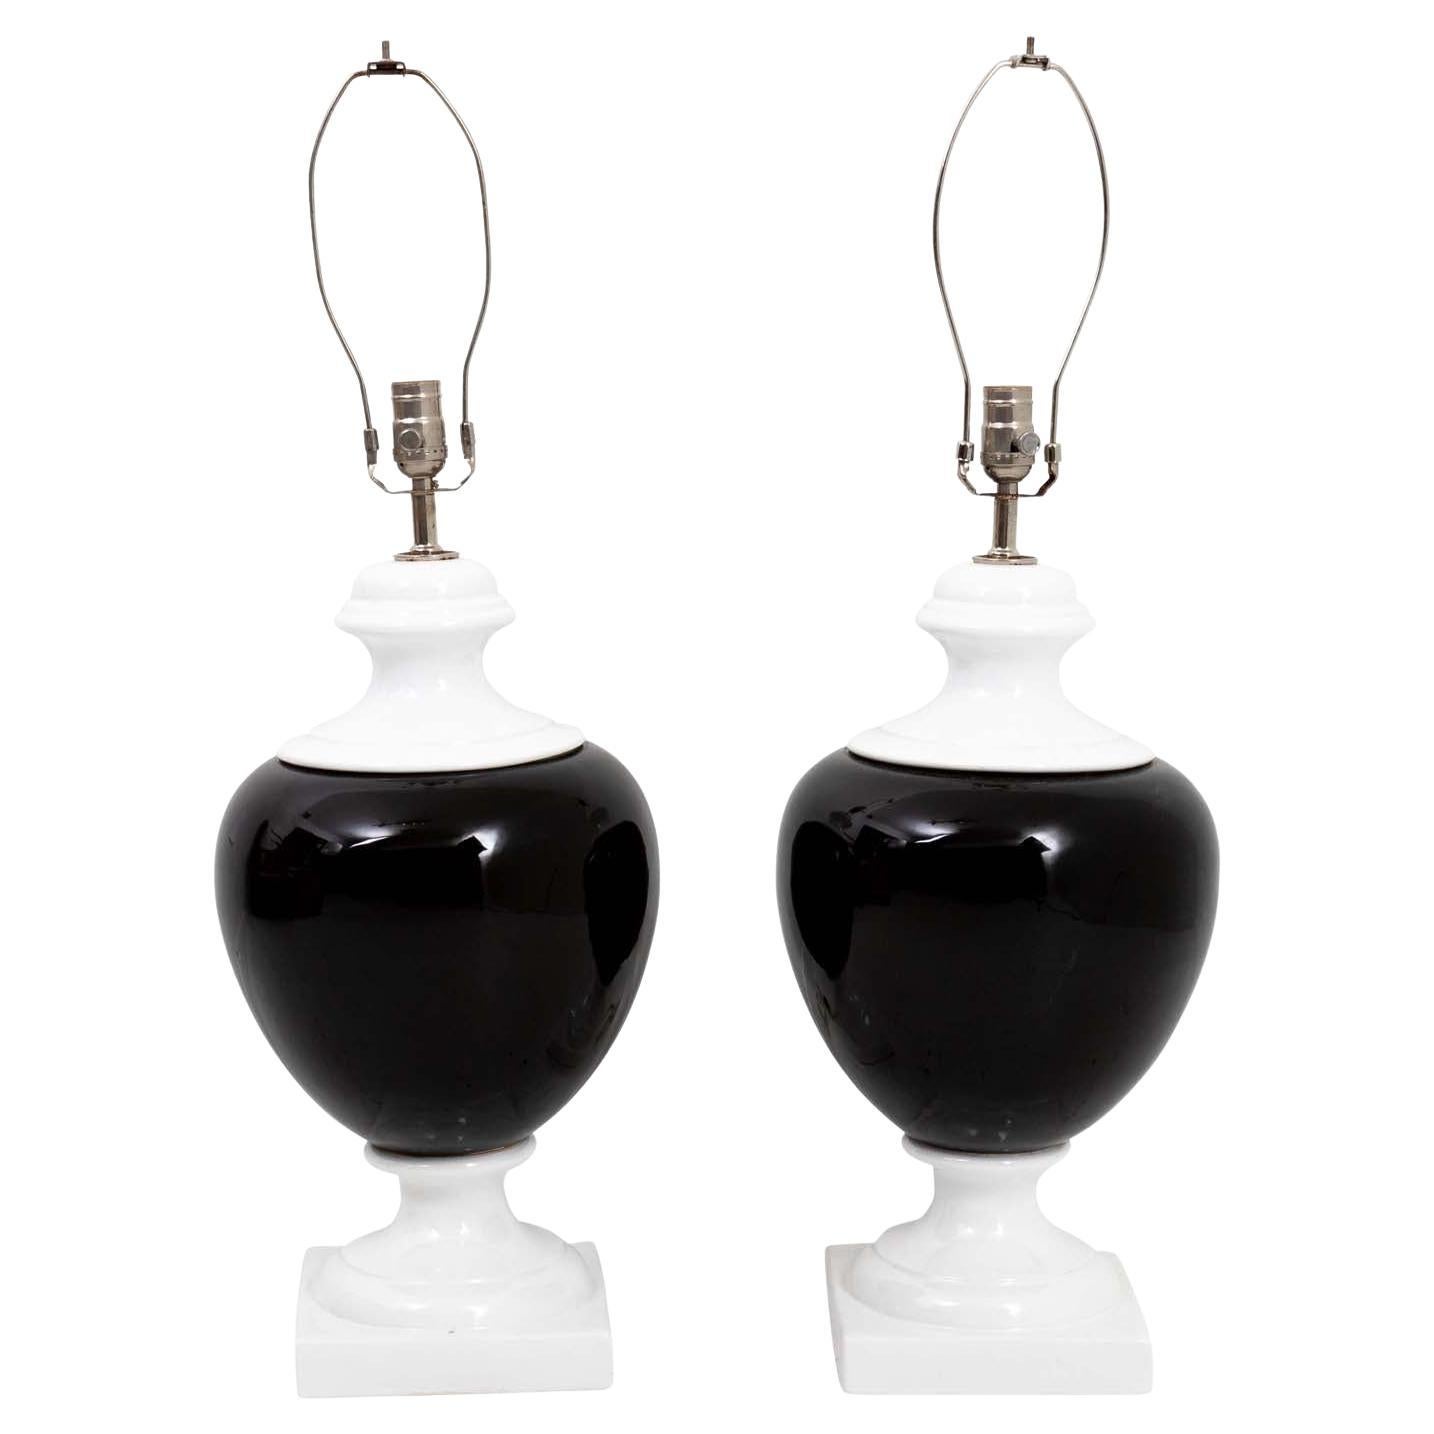 Pair of Black and White Urn Lamps For Sale